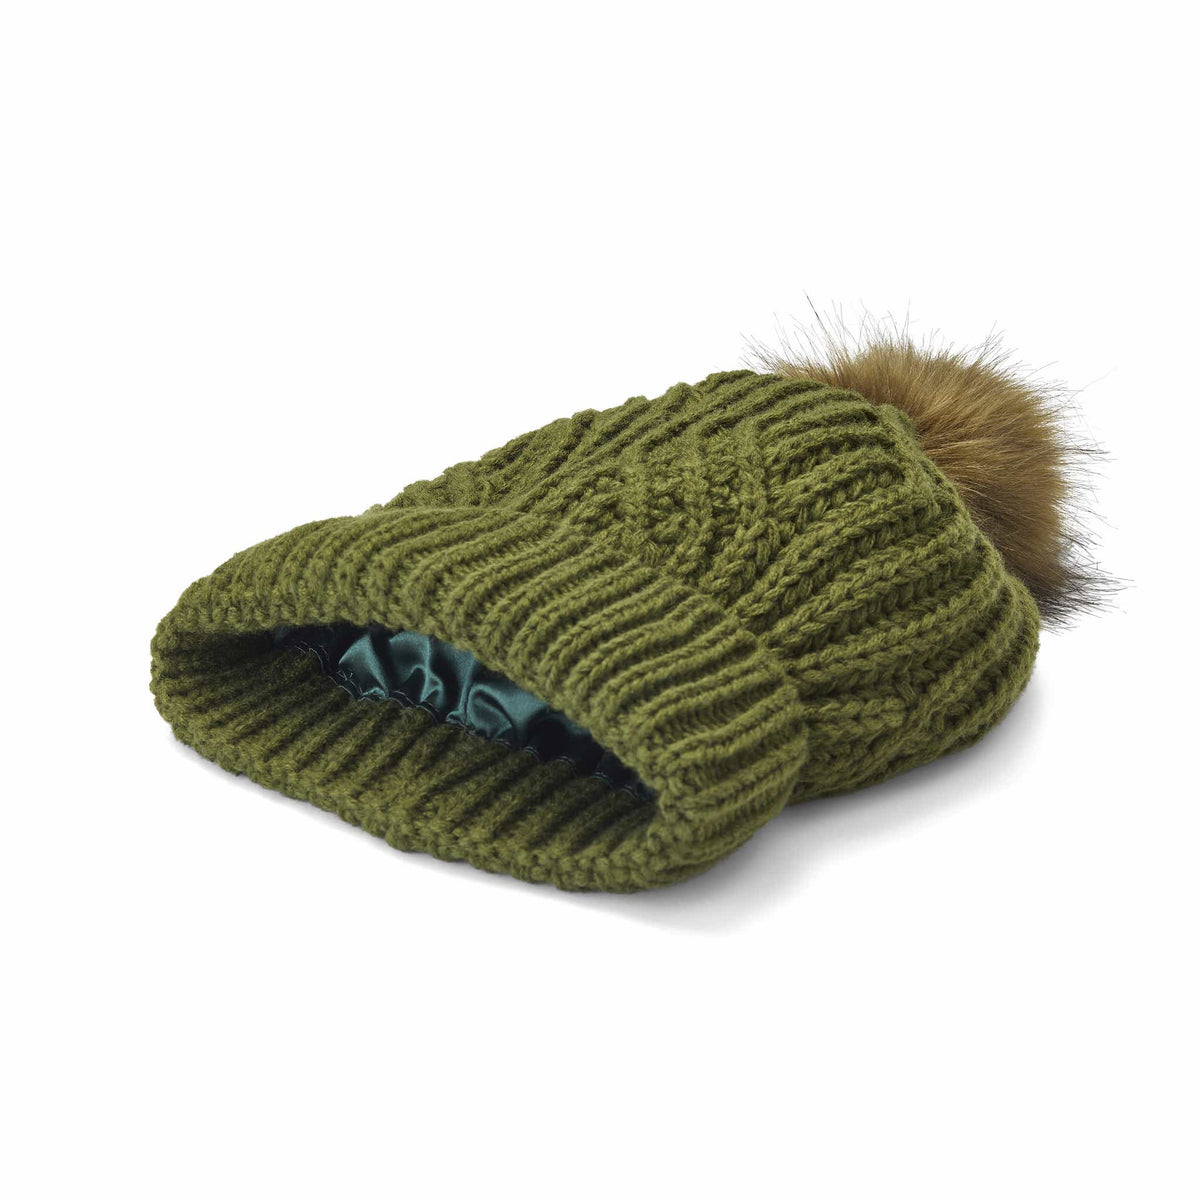 Only Curls Satin Lined Knitted Beanie Hat - Olive with Pom Pom - Only Curls